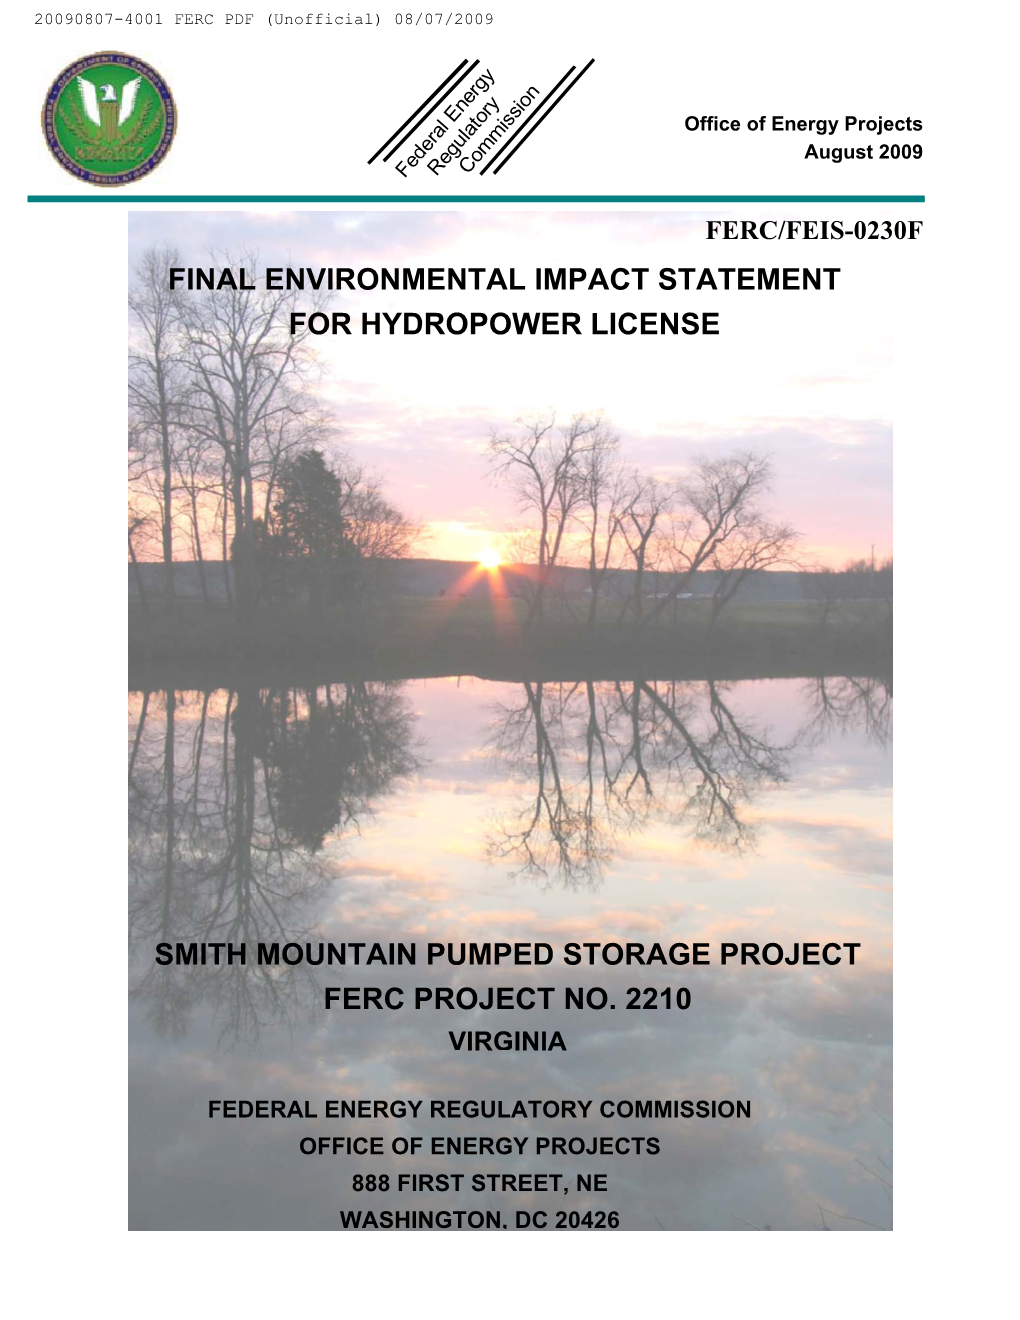 Final Environmental Impact Statement for Hydropower License Smith Mountain Pumped Storage Project Ferc Project No. 2210